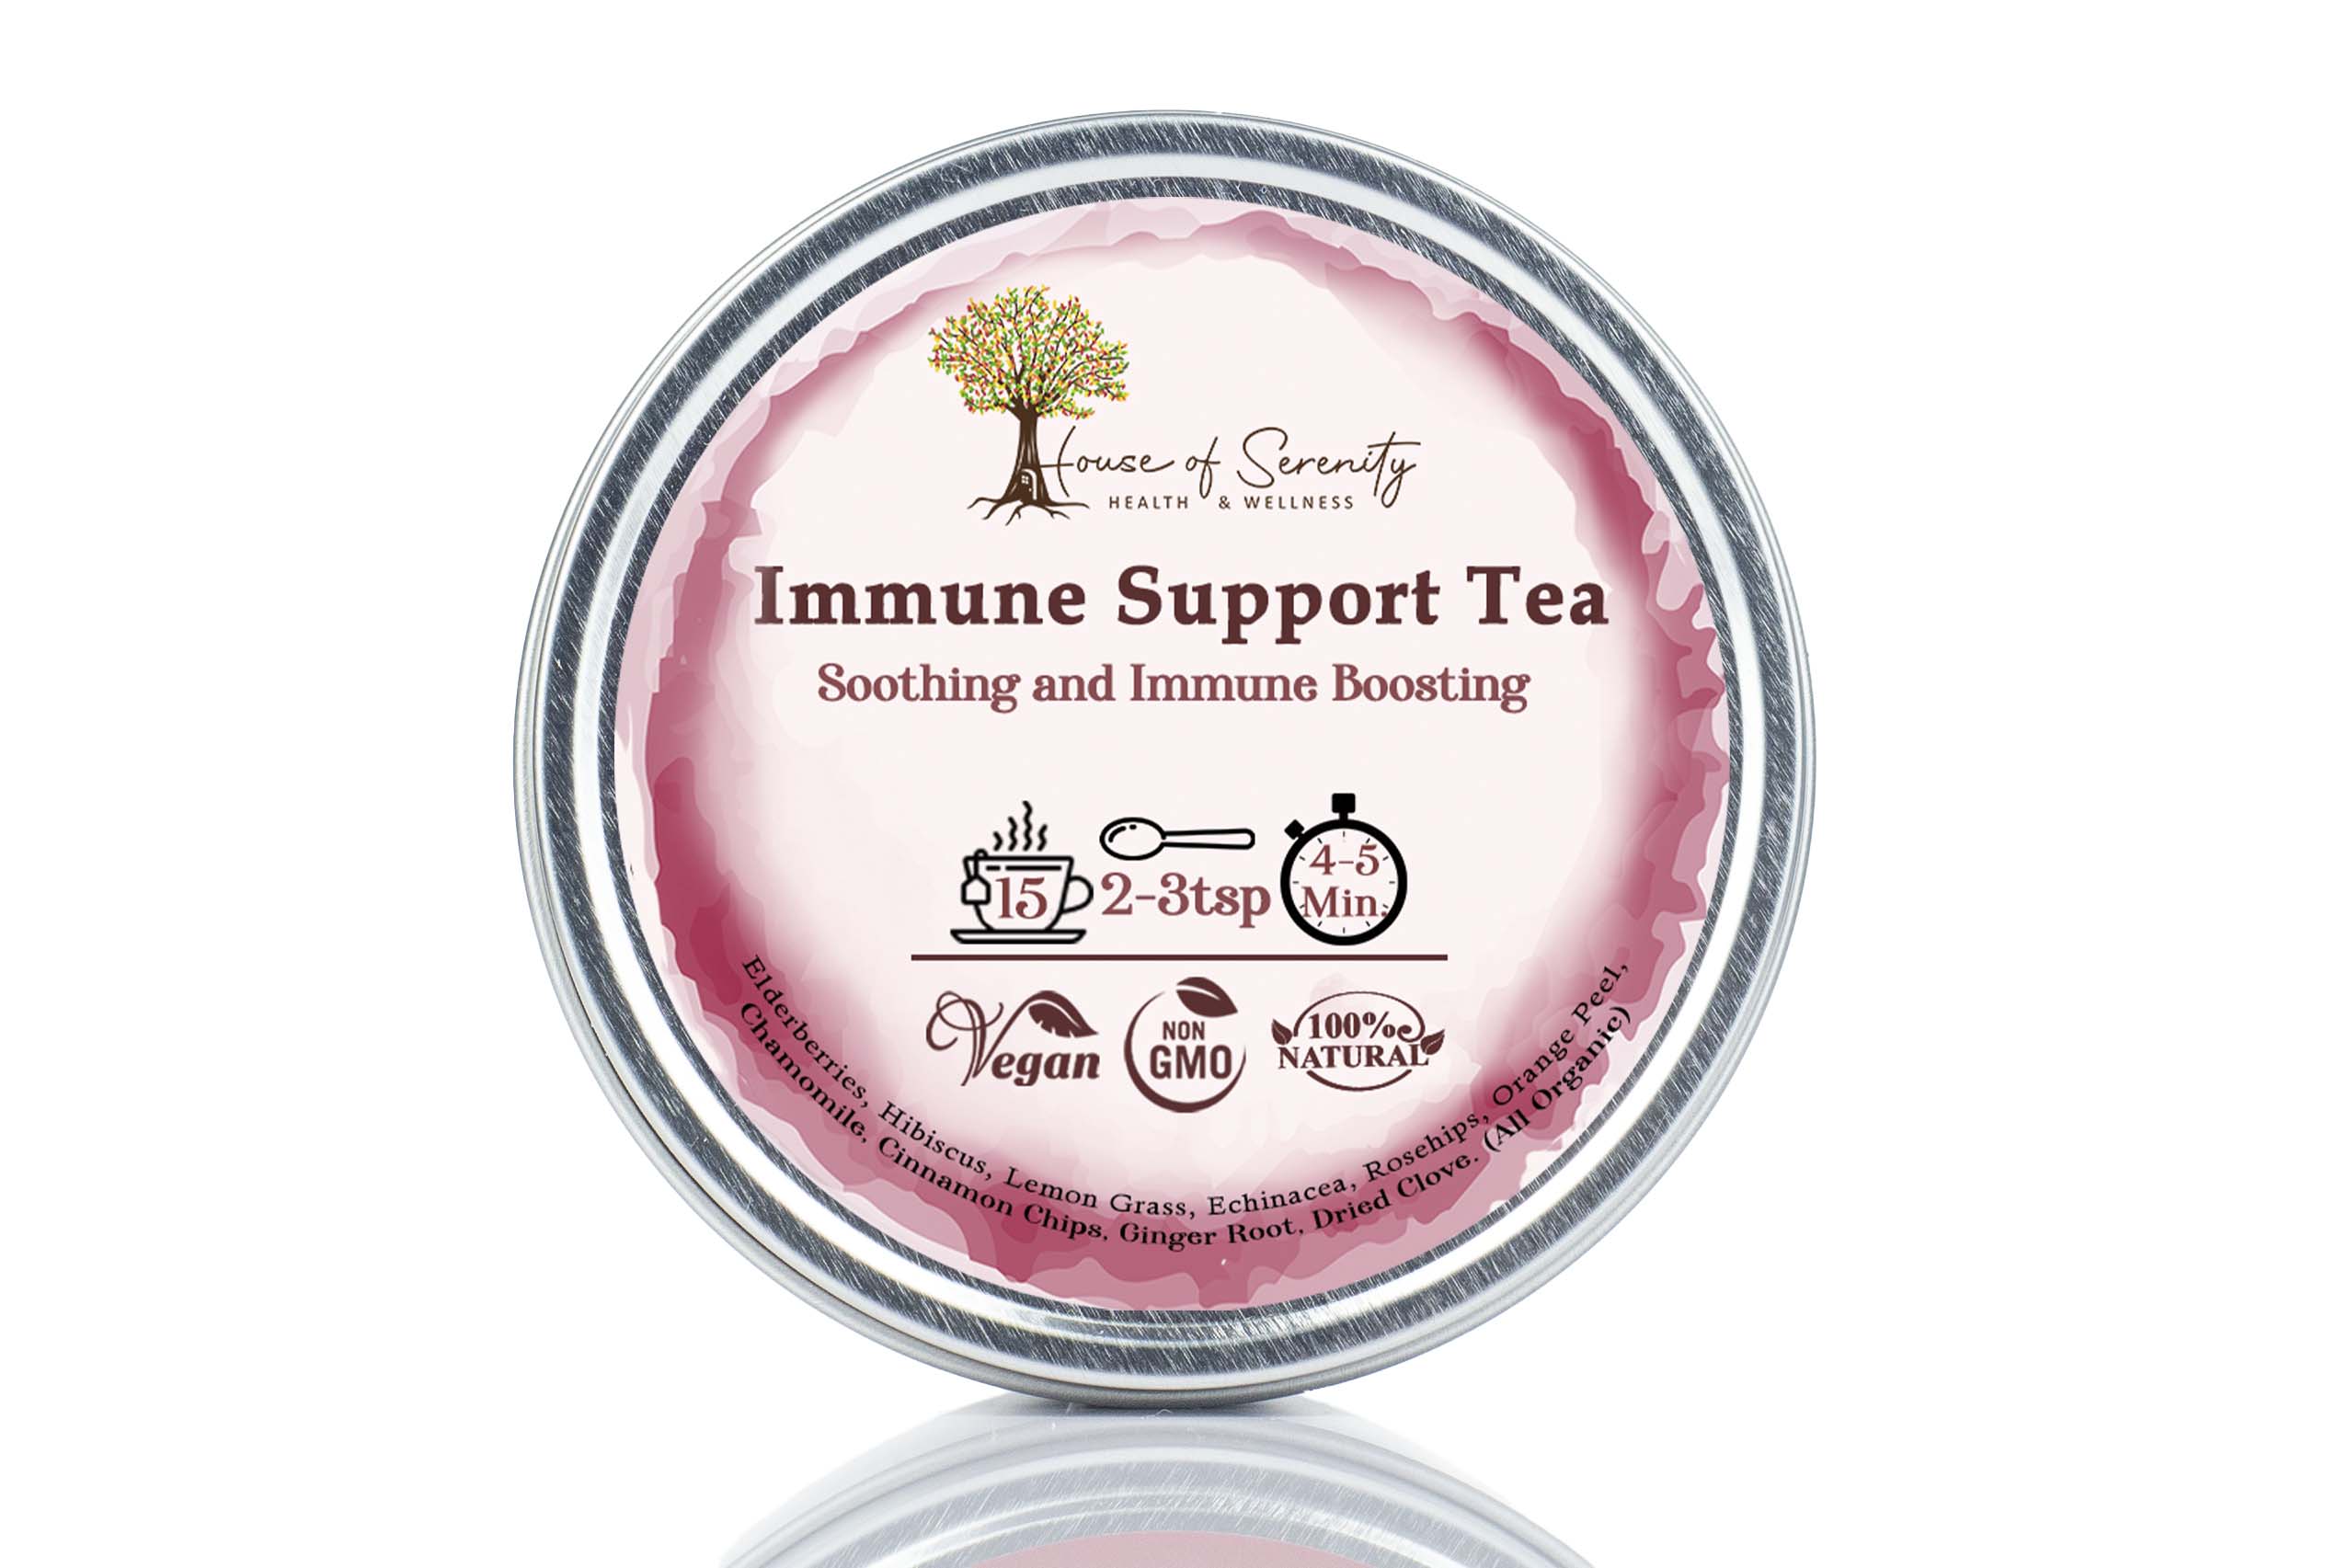 Immune Support Tea by House of Serenity Health and Wellness